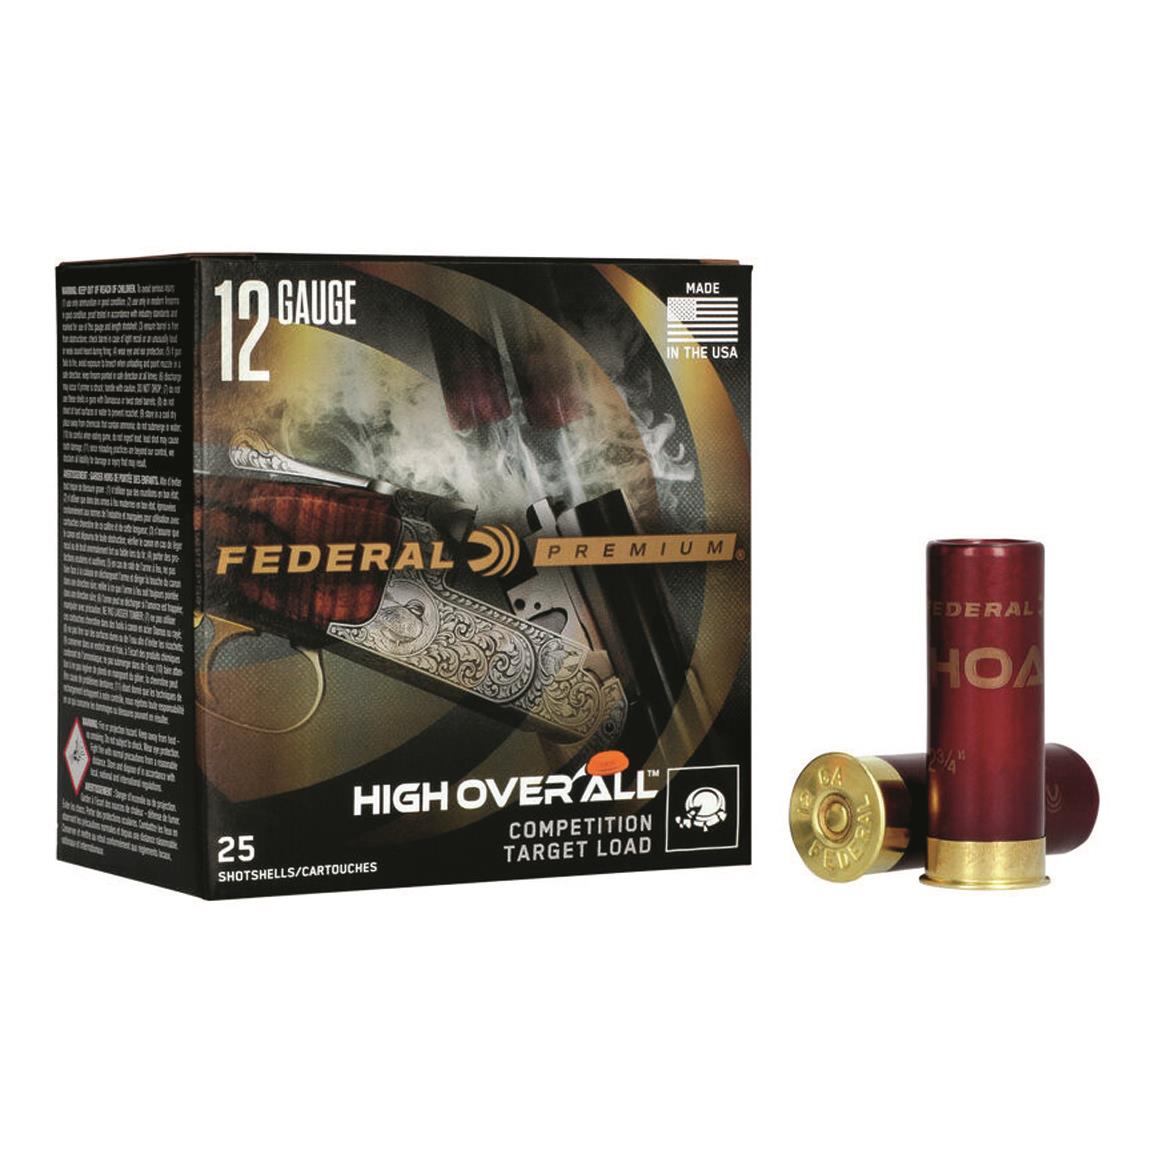 Federal Premium High Over All Competition Target Loads, 12 Gauge, 2 3/4", 1 1/8 oz., 25 Rounds